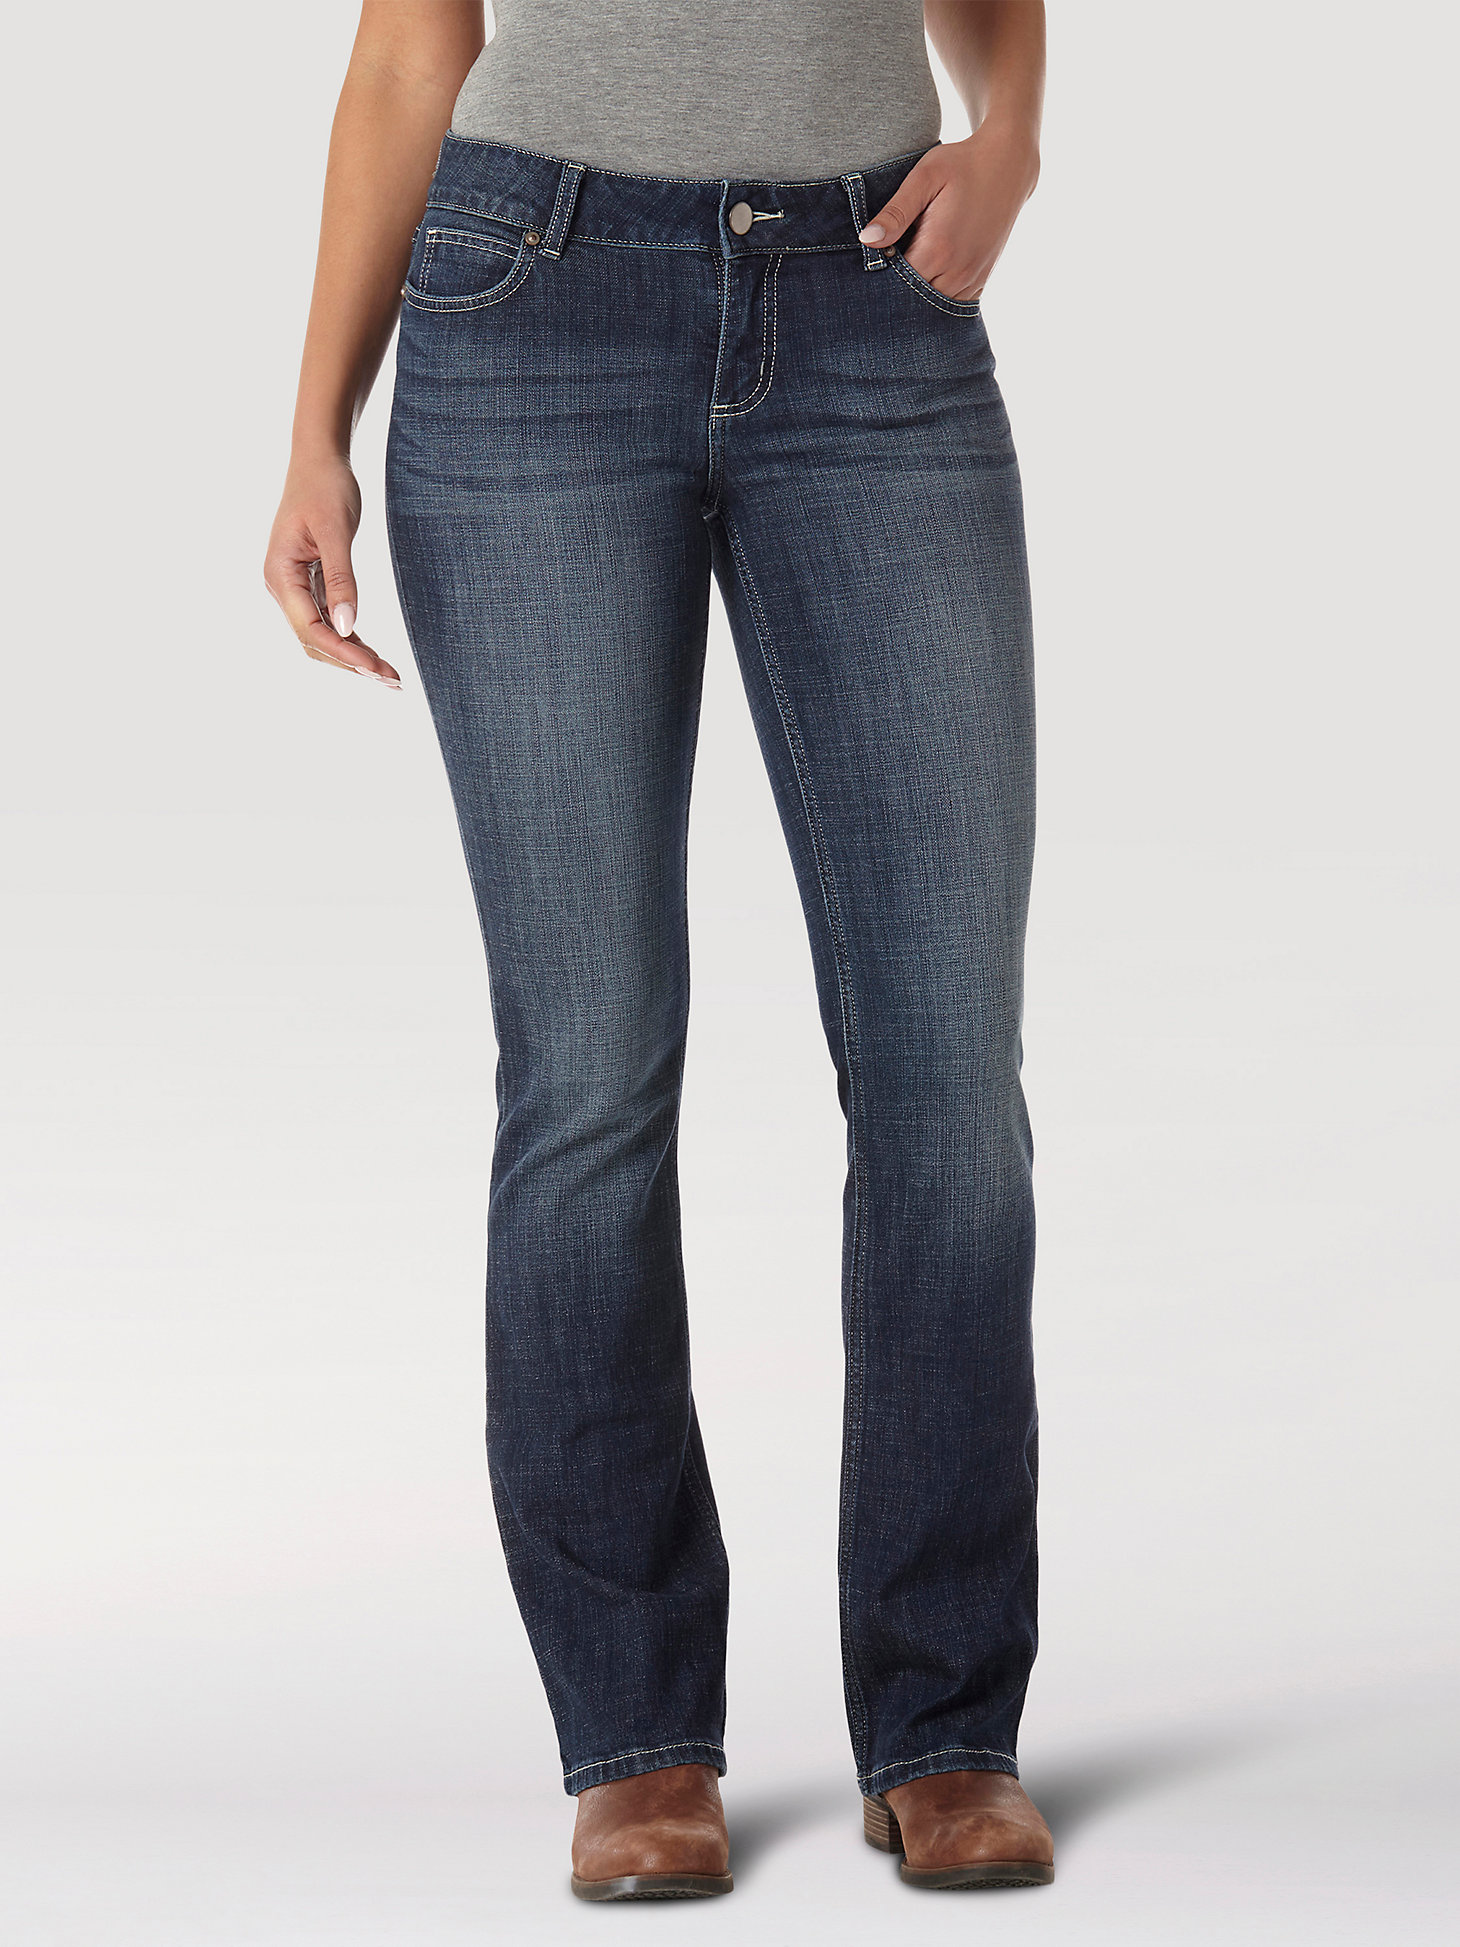 turtle lay off her Women's Essential Mid-Rise Bootcut Jean